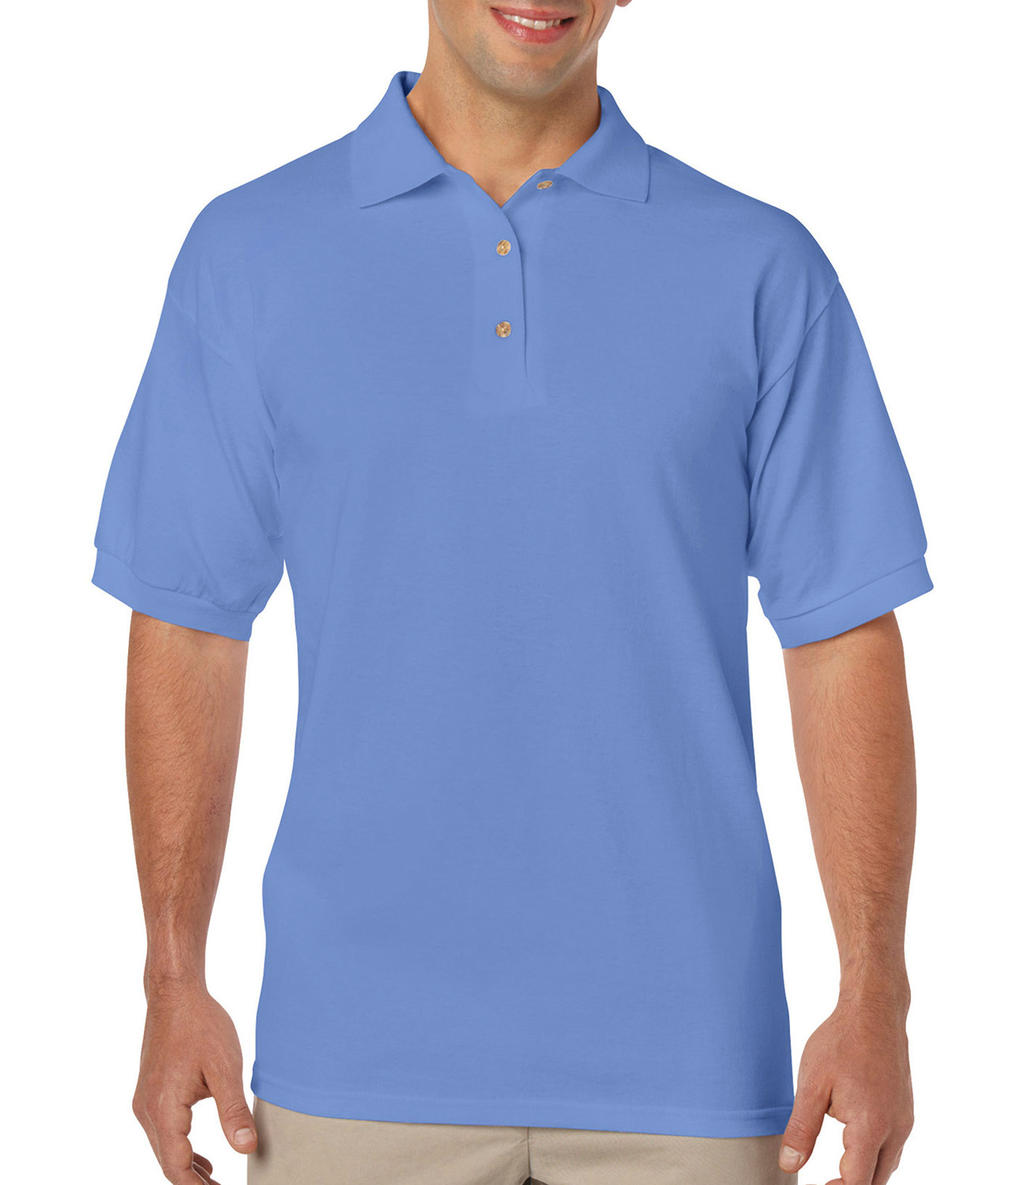  DryBlend Adult Jersey Polo in Farbe Carolina Blue